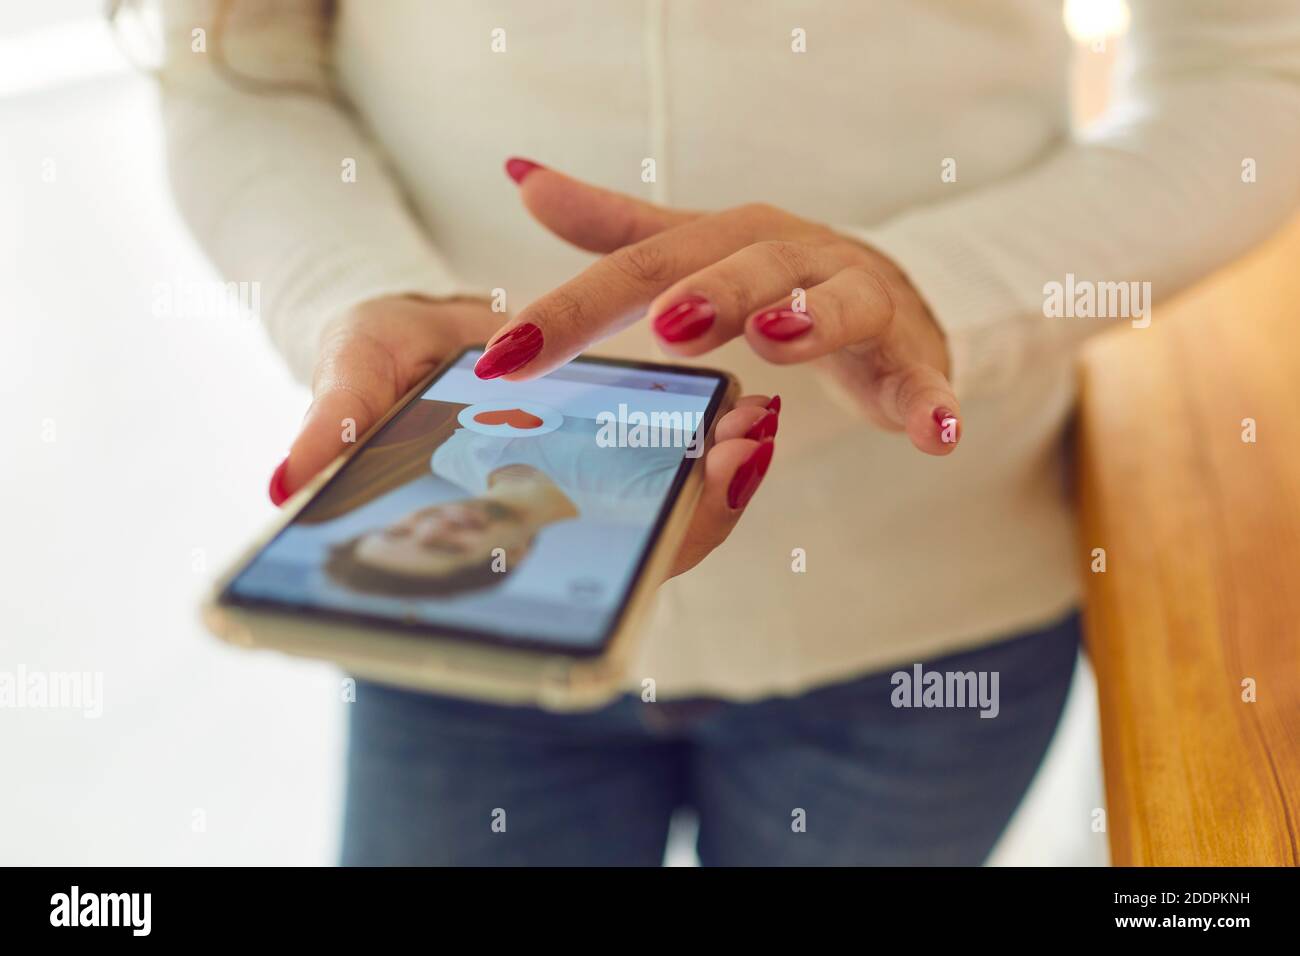 Womans hands hands choosing male profile in online dating application on smartphone Stock Photo